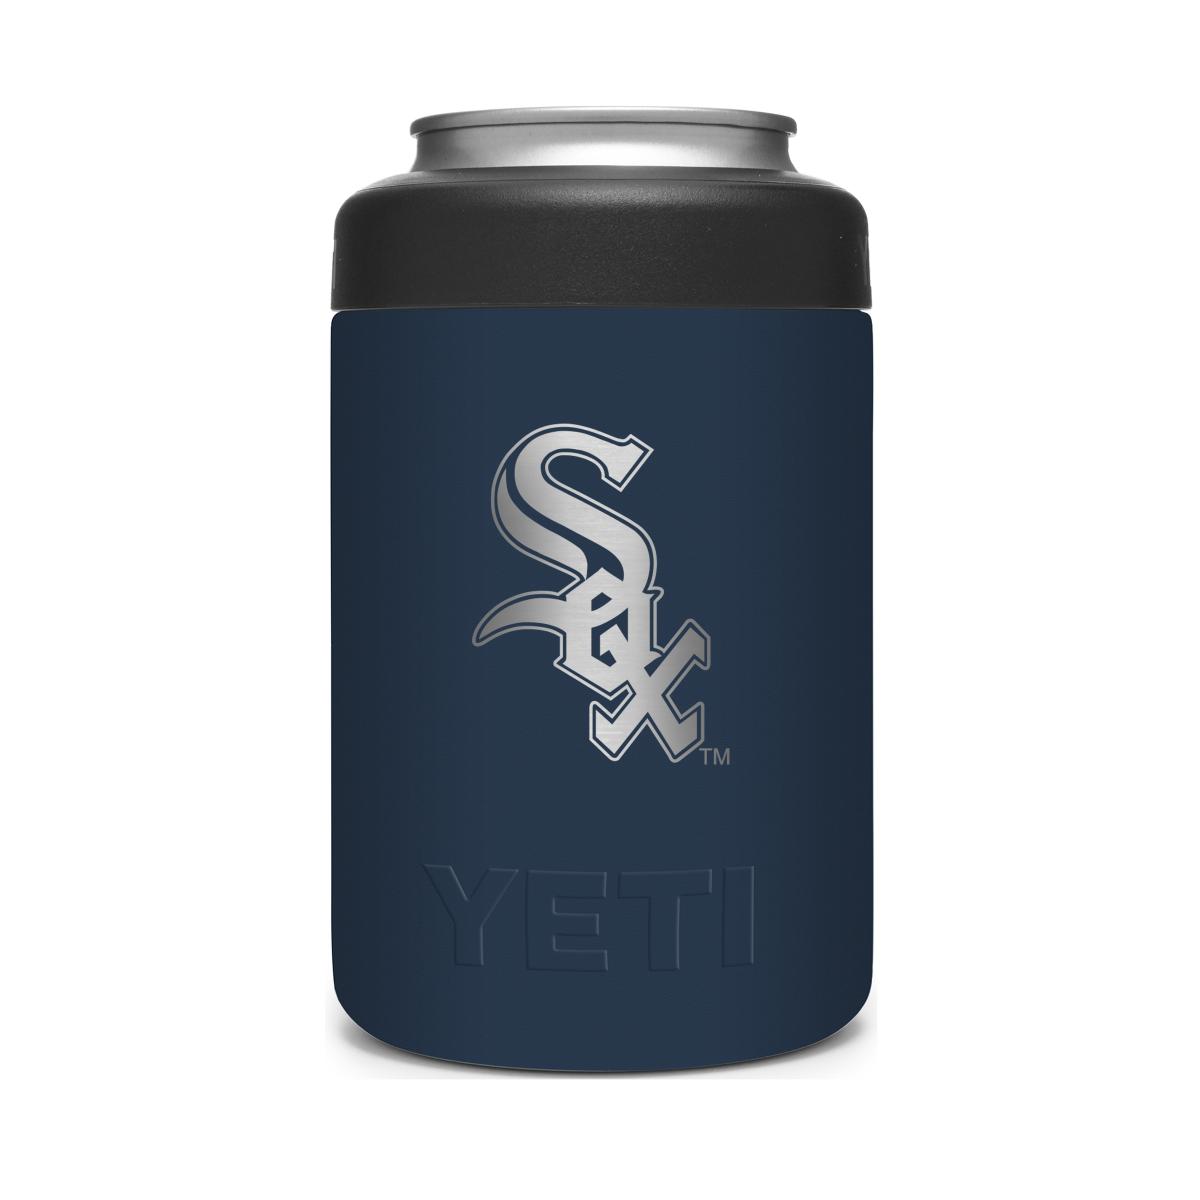 Chicago White Sox 12 Oz Colster from YETI - $35.00